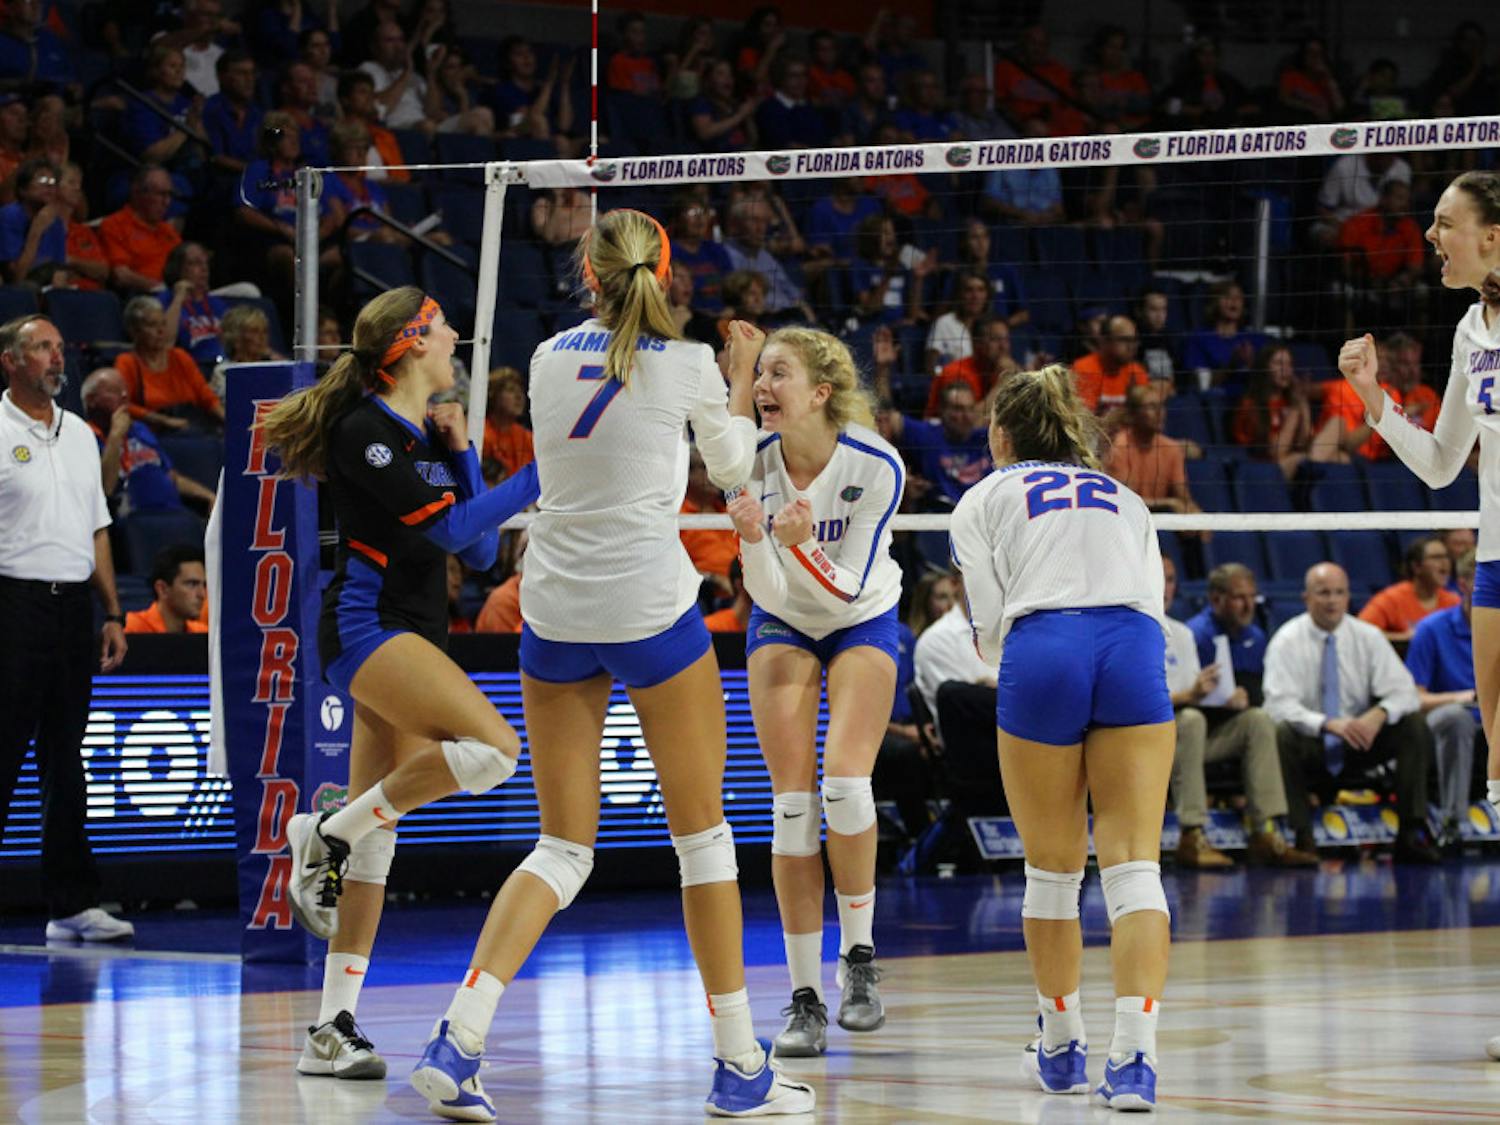 Florida's volleyball team is headed to the Final Four after defeating USC 3-2 on Saturday night in the quarterfinals of the NCAA Tournament at the O'Connell Center.